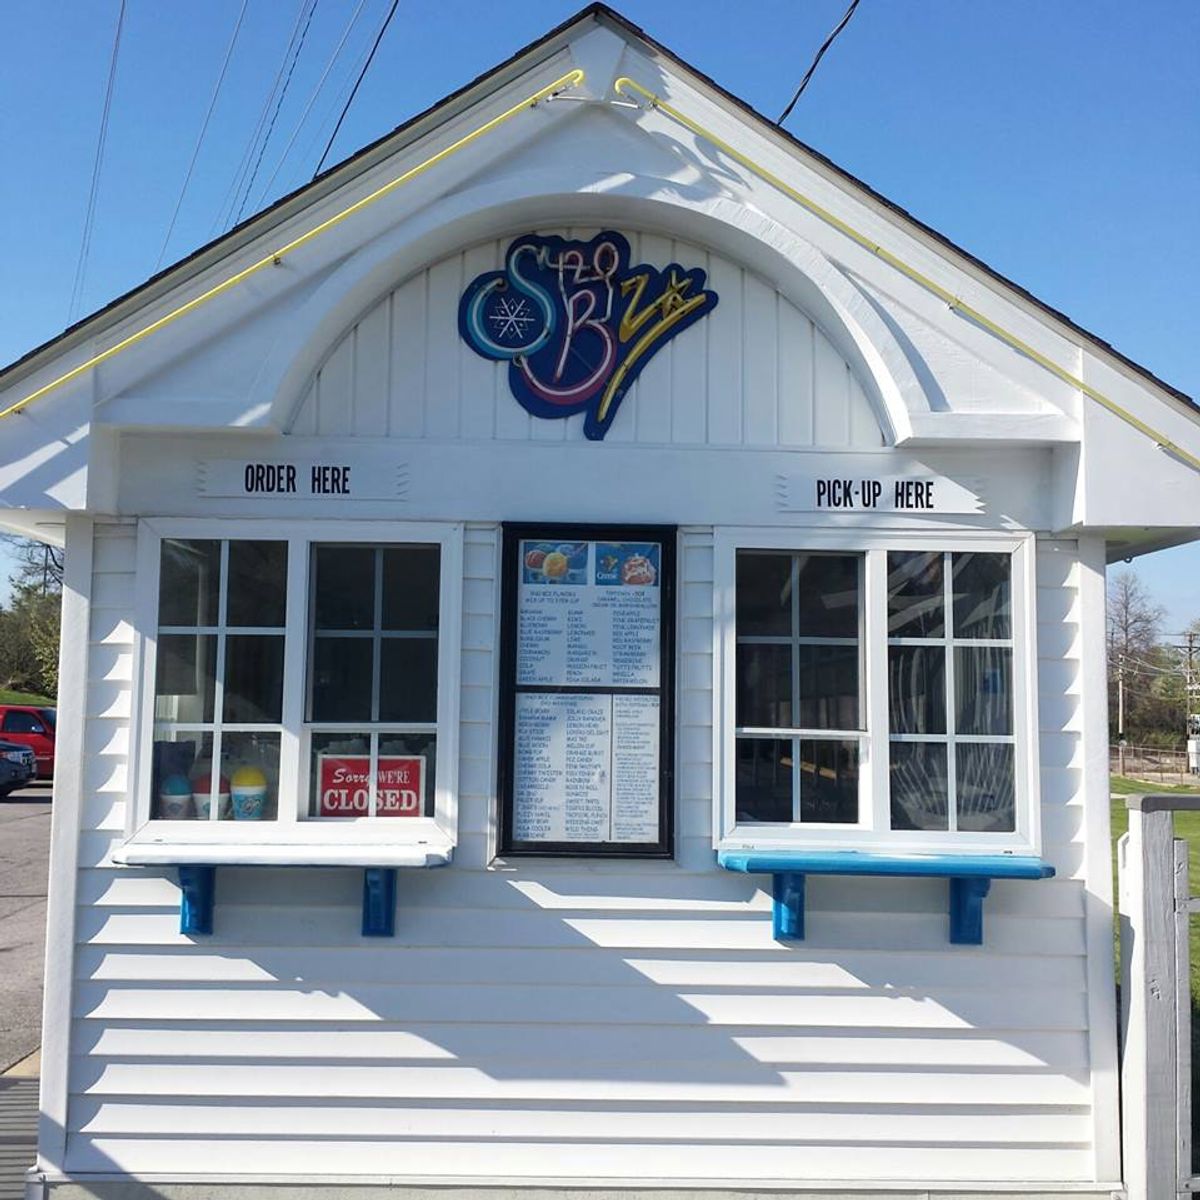 8 Reasons Why Sno Biz In O'Fallon Is The Best Shaved Ice Place Around